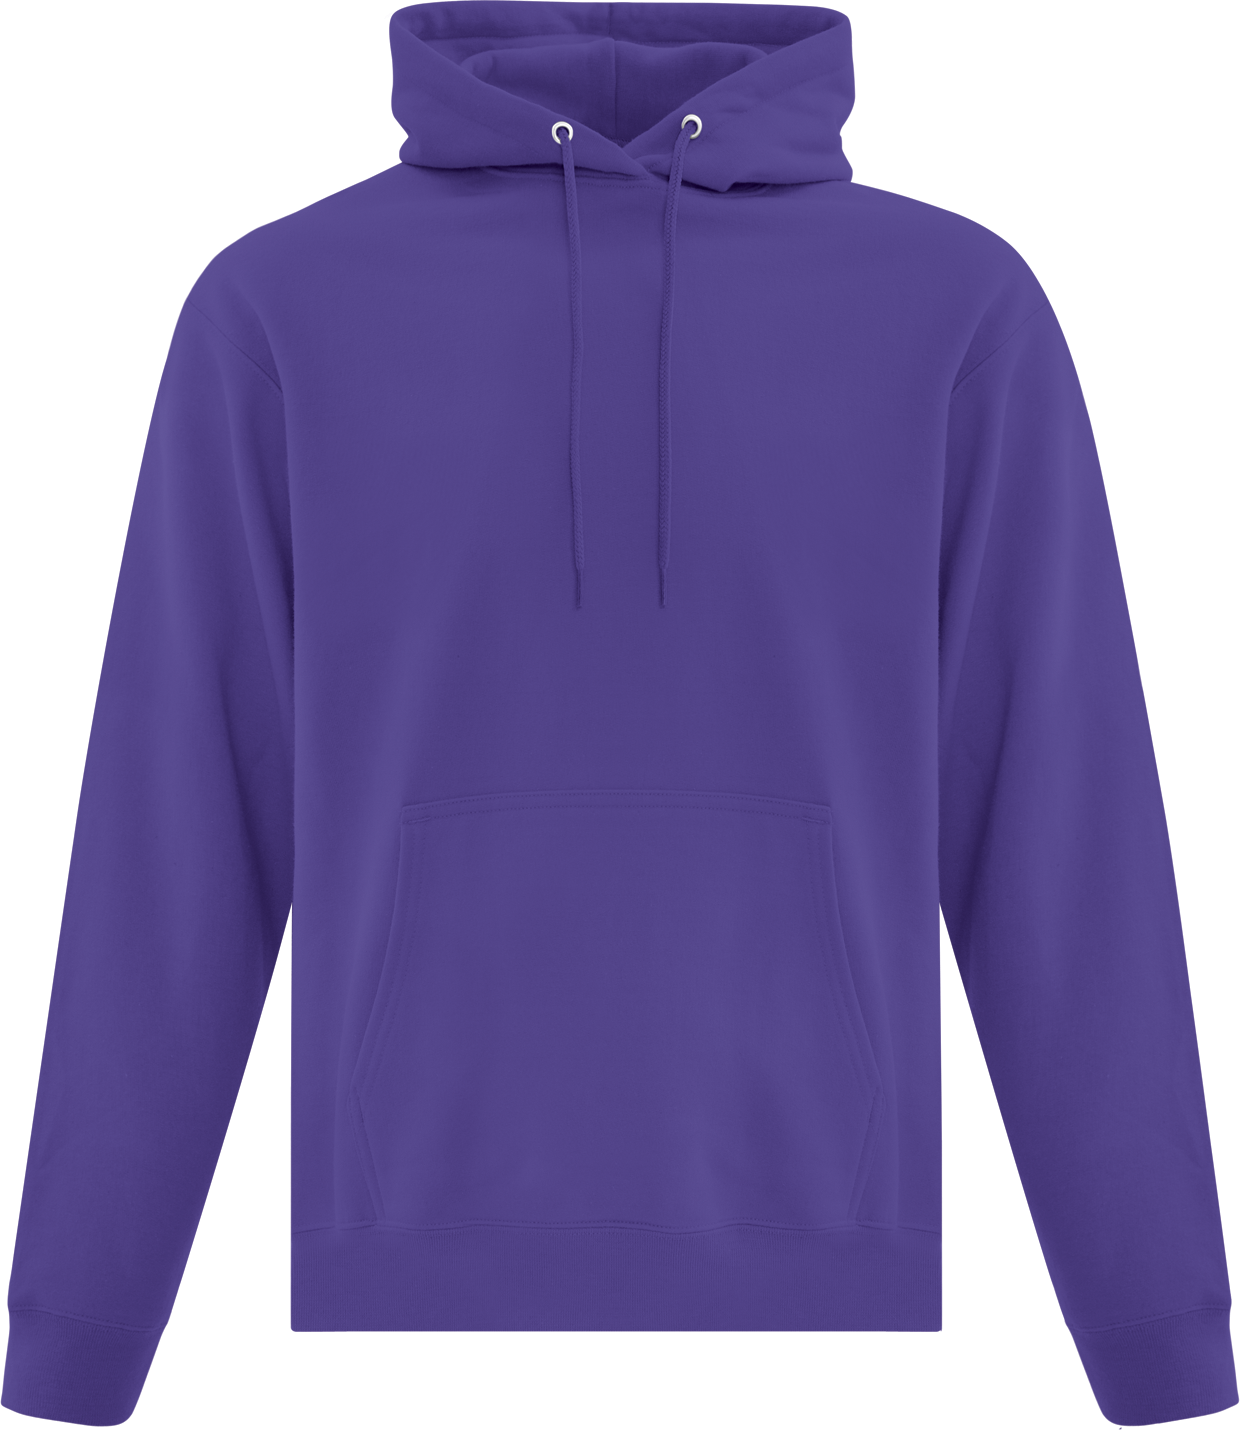 Adult Pullover Hoodie, ATCF2500 - Additional Colors